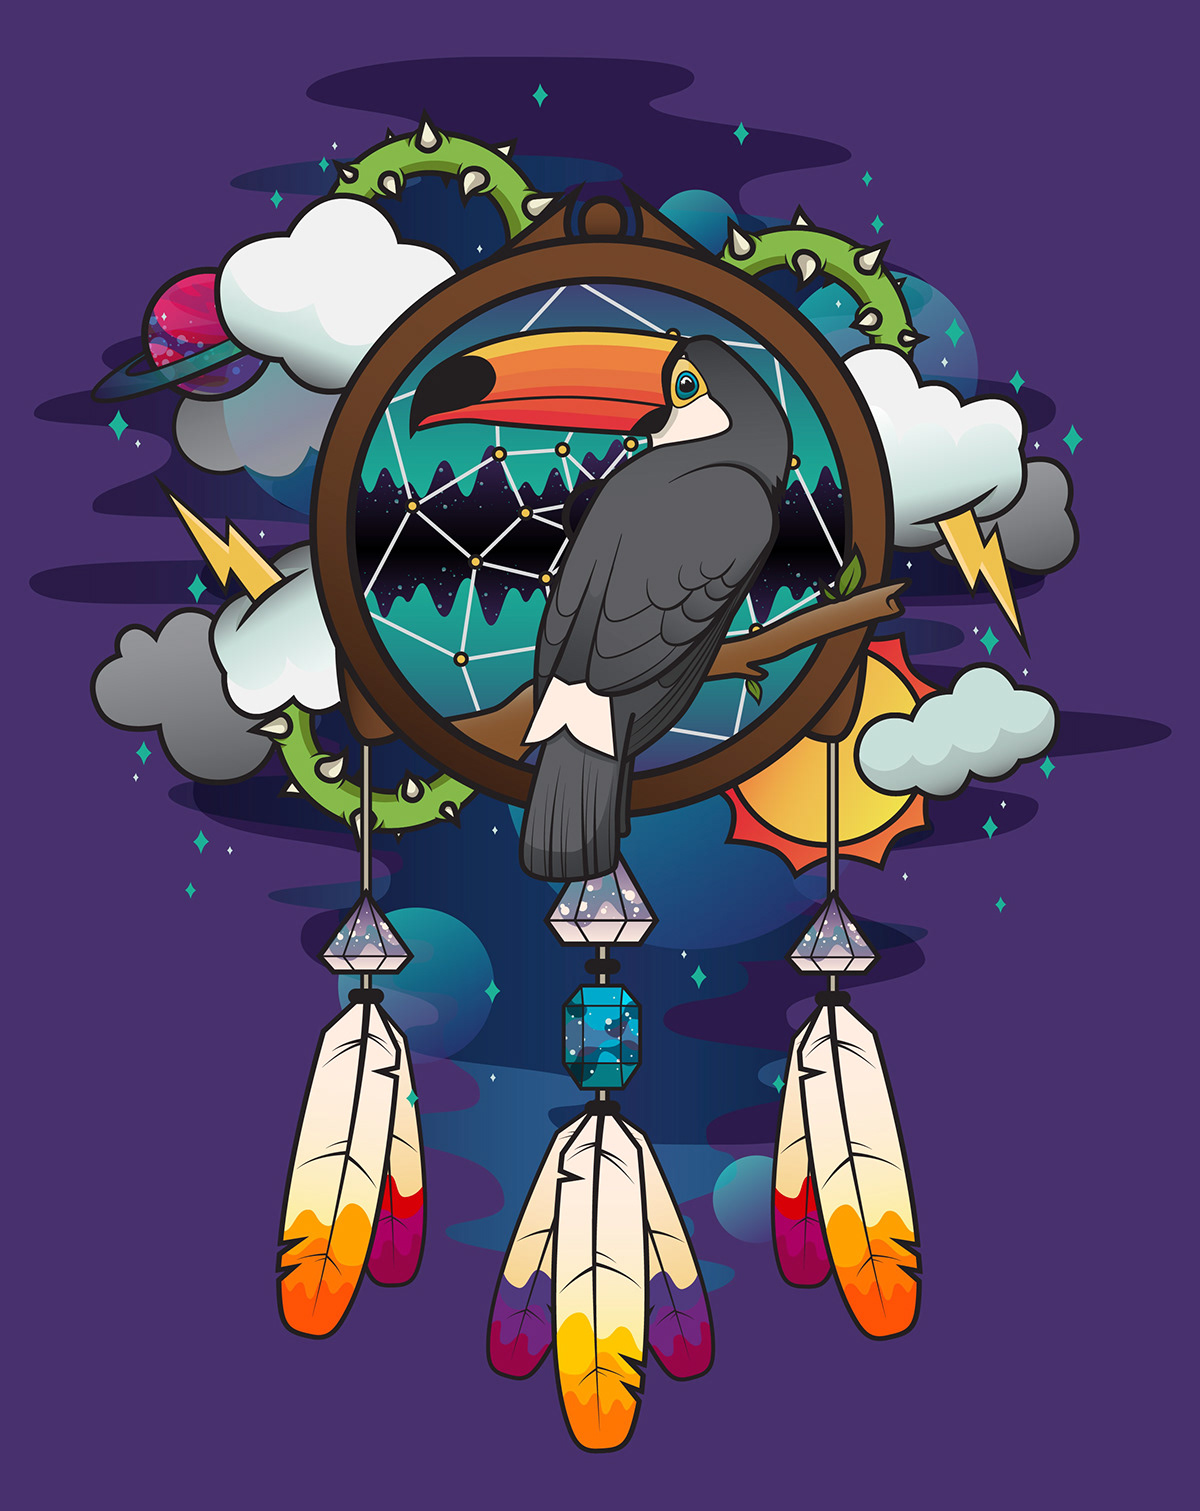 walking on a dream toucan poster Icon walrus portrait Personal Work vector